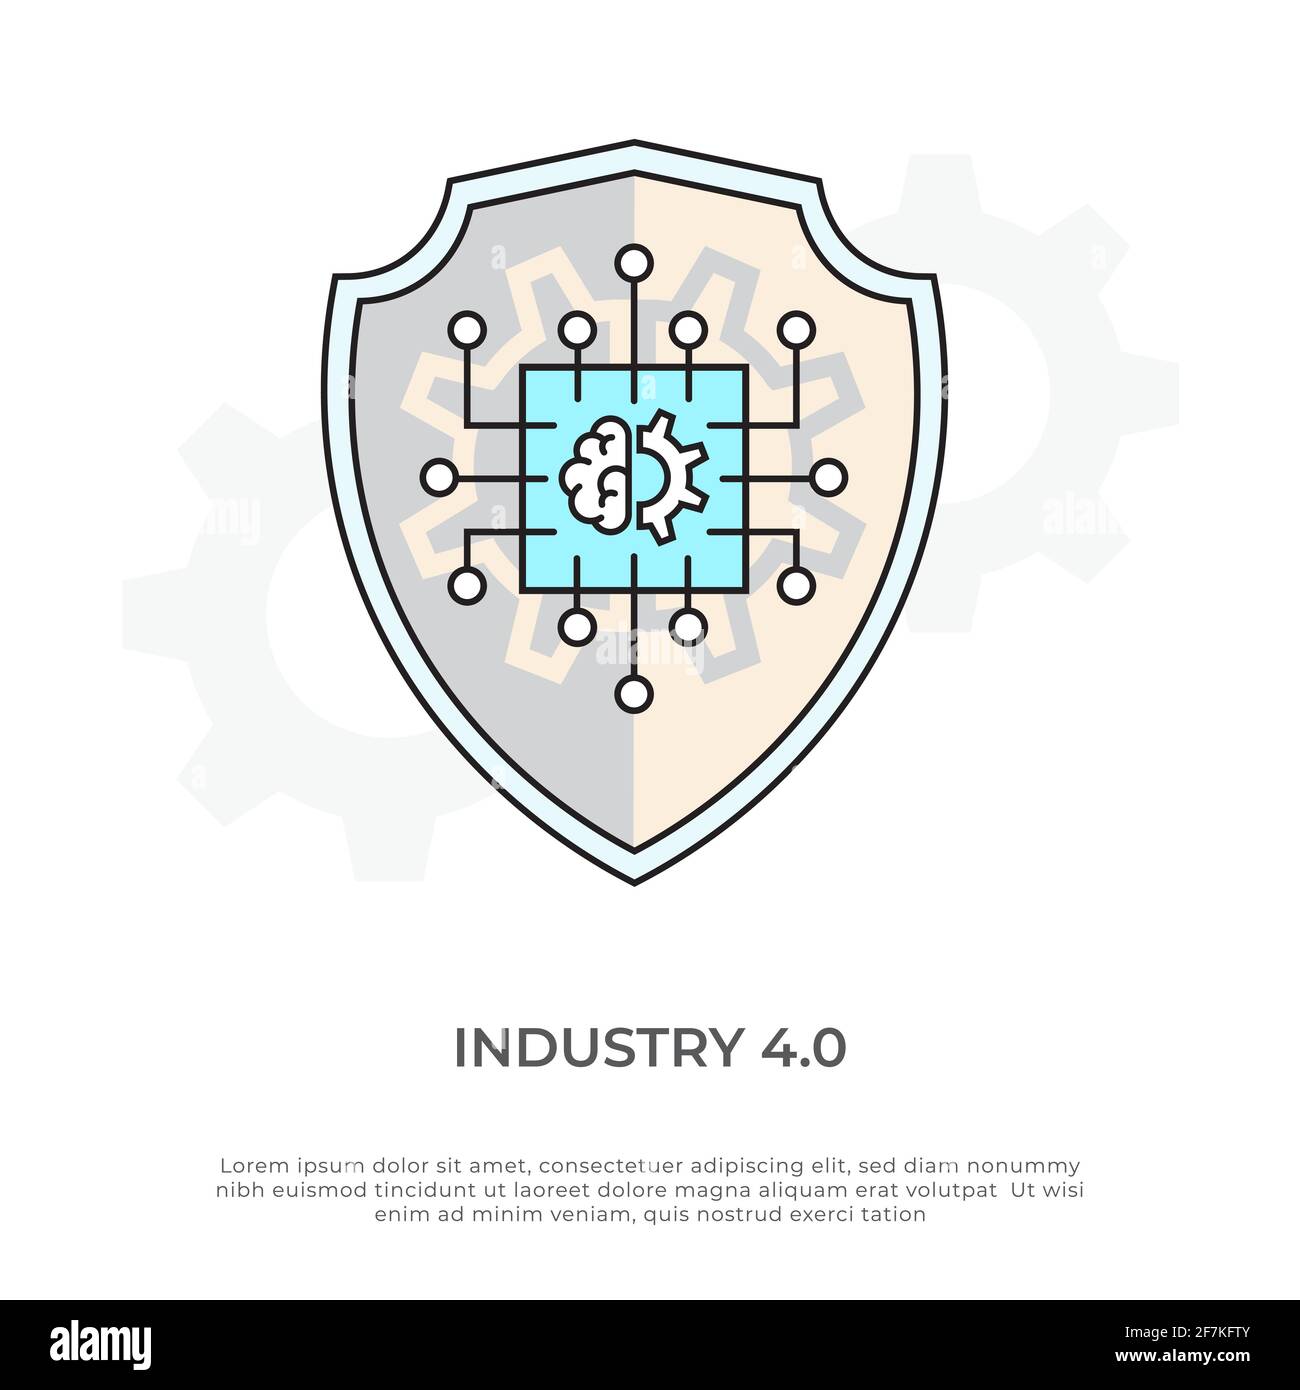 Industry 4.0 vector illustration. Security industrial machine learning concept. AI process automation technology development image. Stock Vector